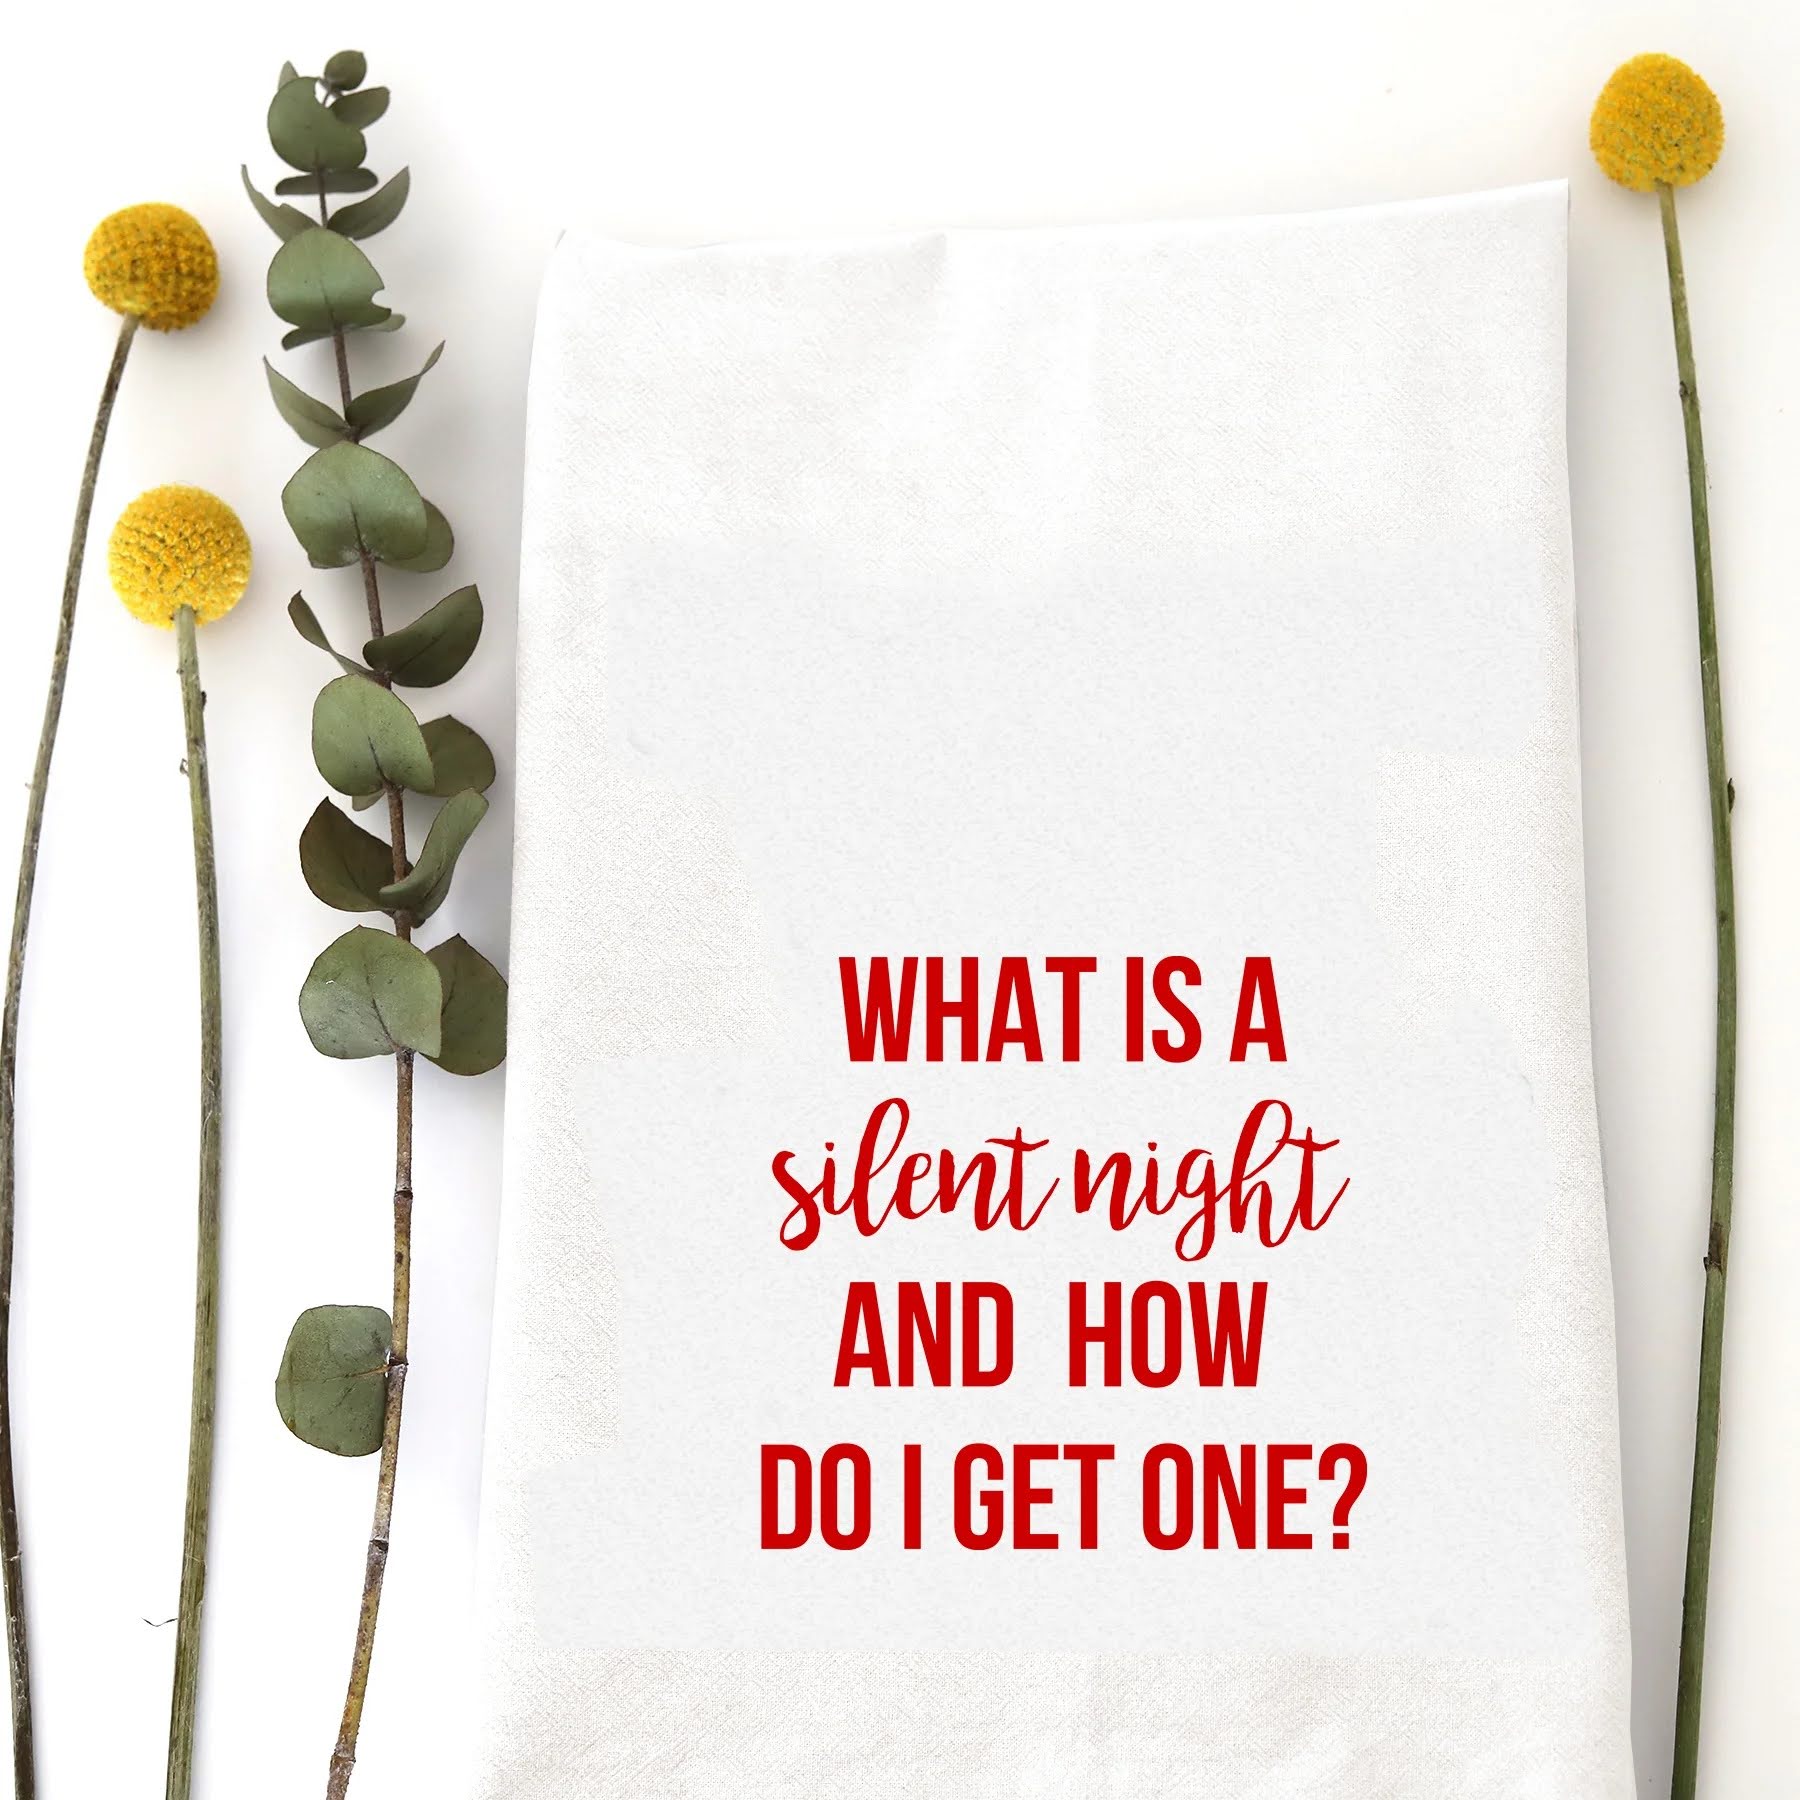 A holiday tea towel with the words "What is a silent night and how do I get one?" printed on it.